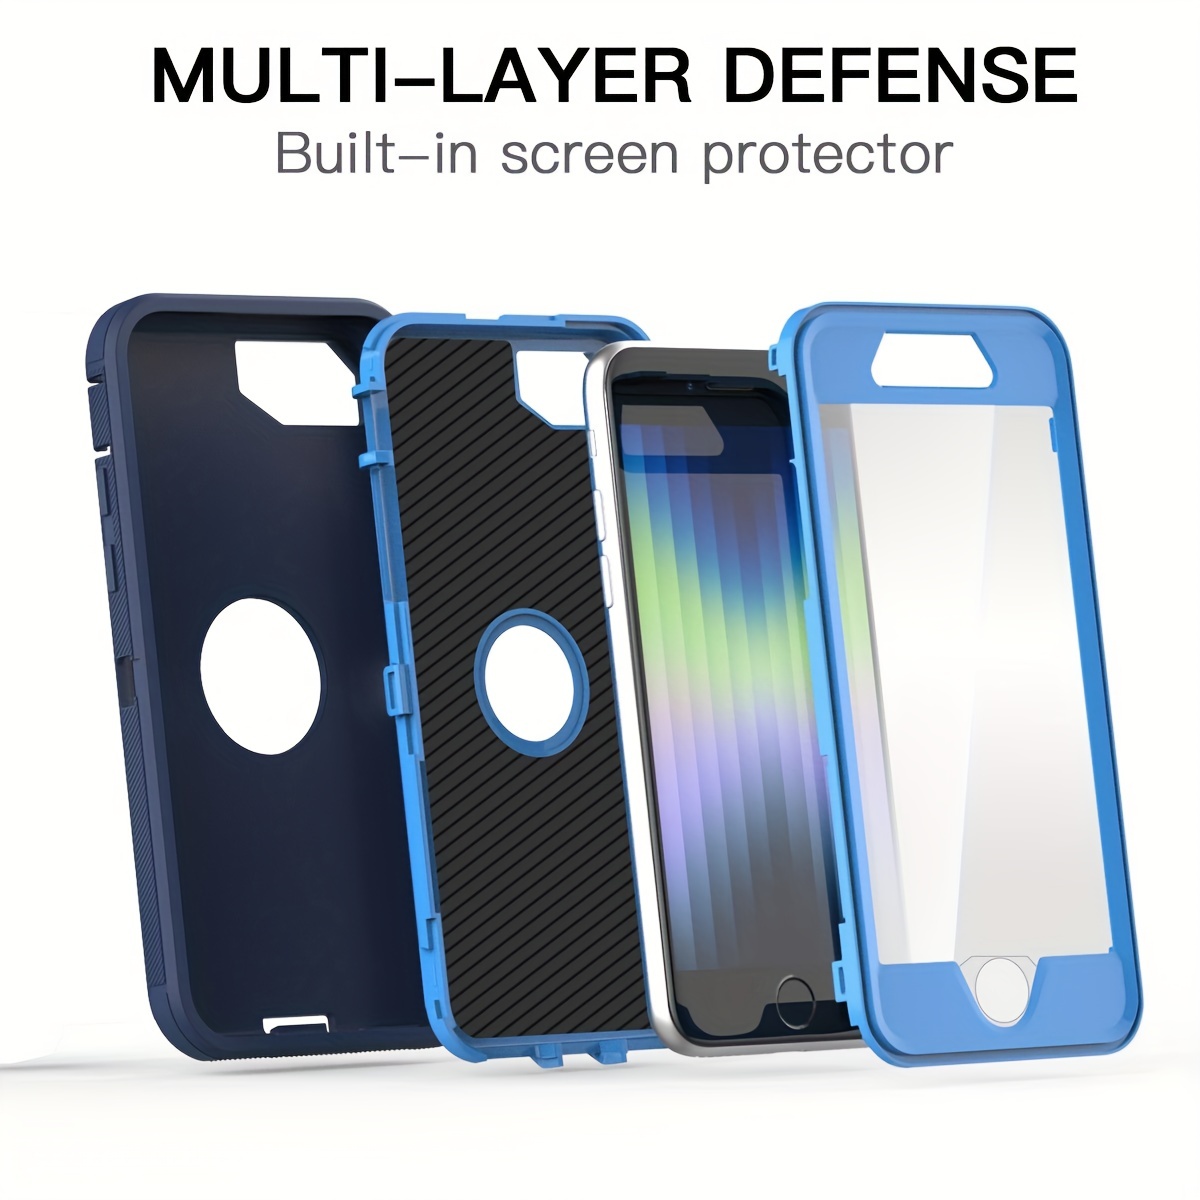 iPhone 7 plus / iphone 8 Plus / Case Fits Otterbox Defender Screen  Protector